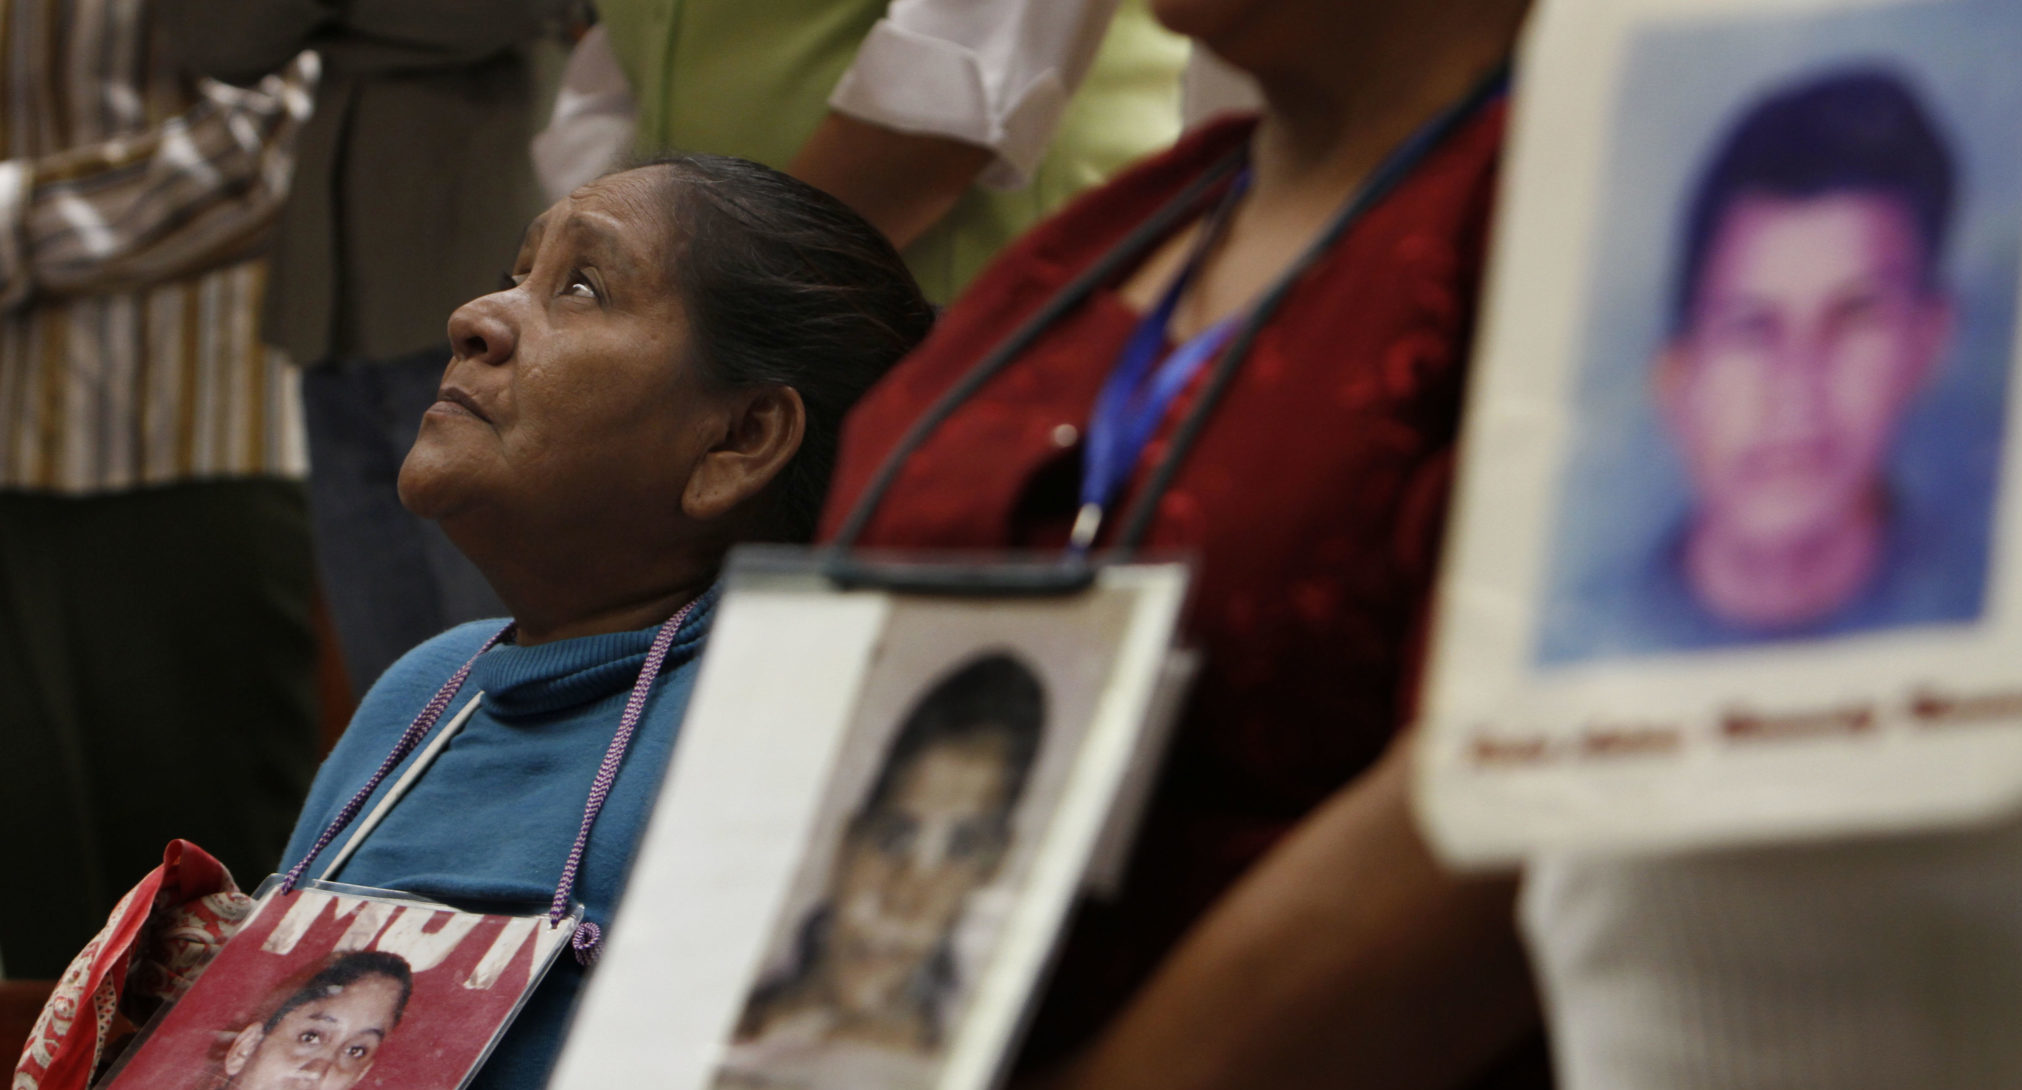 4 Years on, No Accountability for 43 Forcibly Disappeared Students from Ayotzinapa